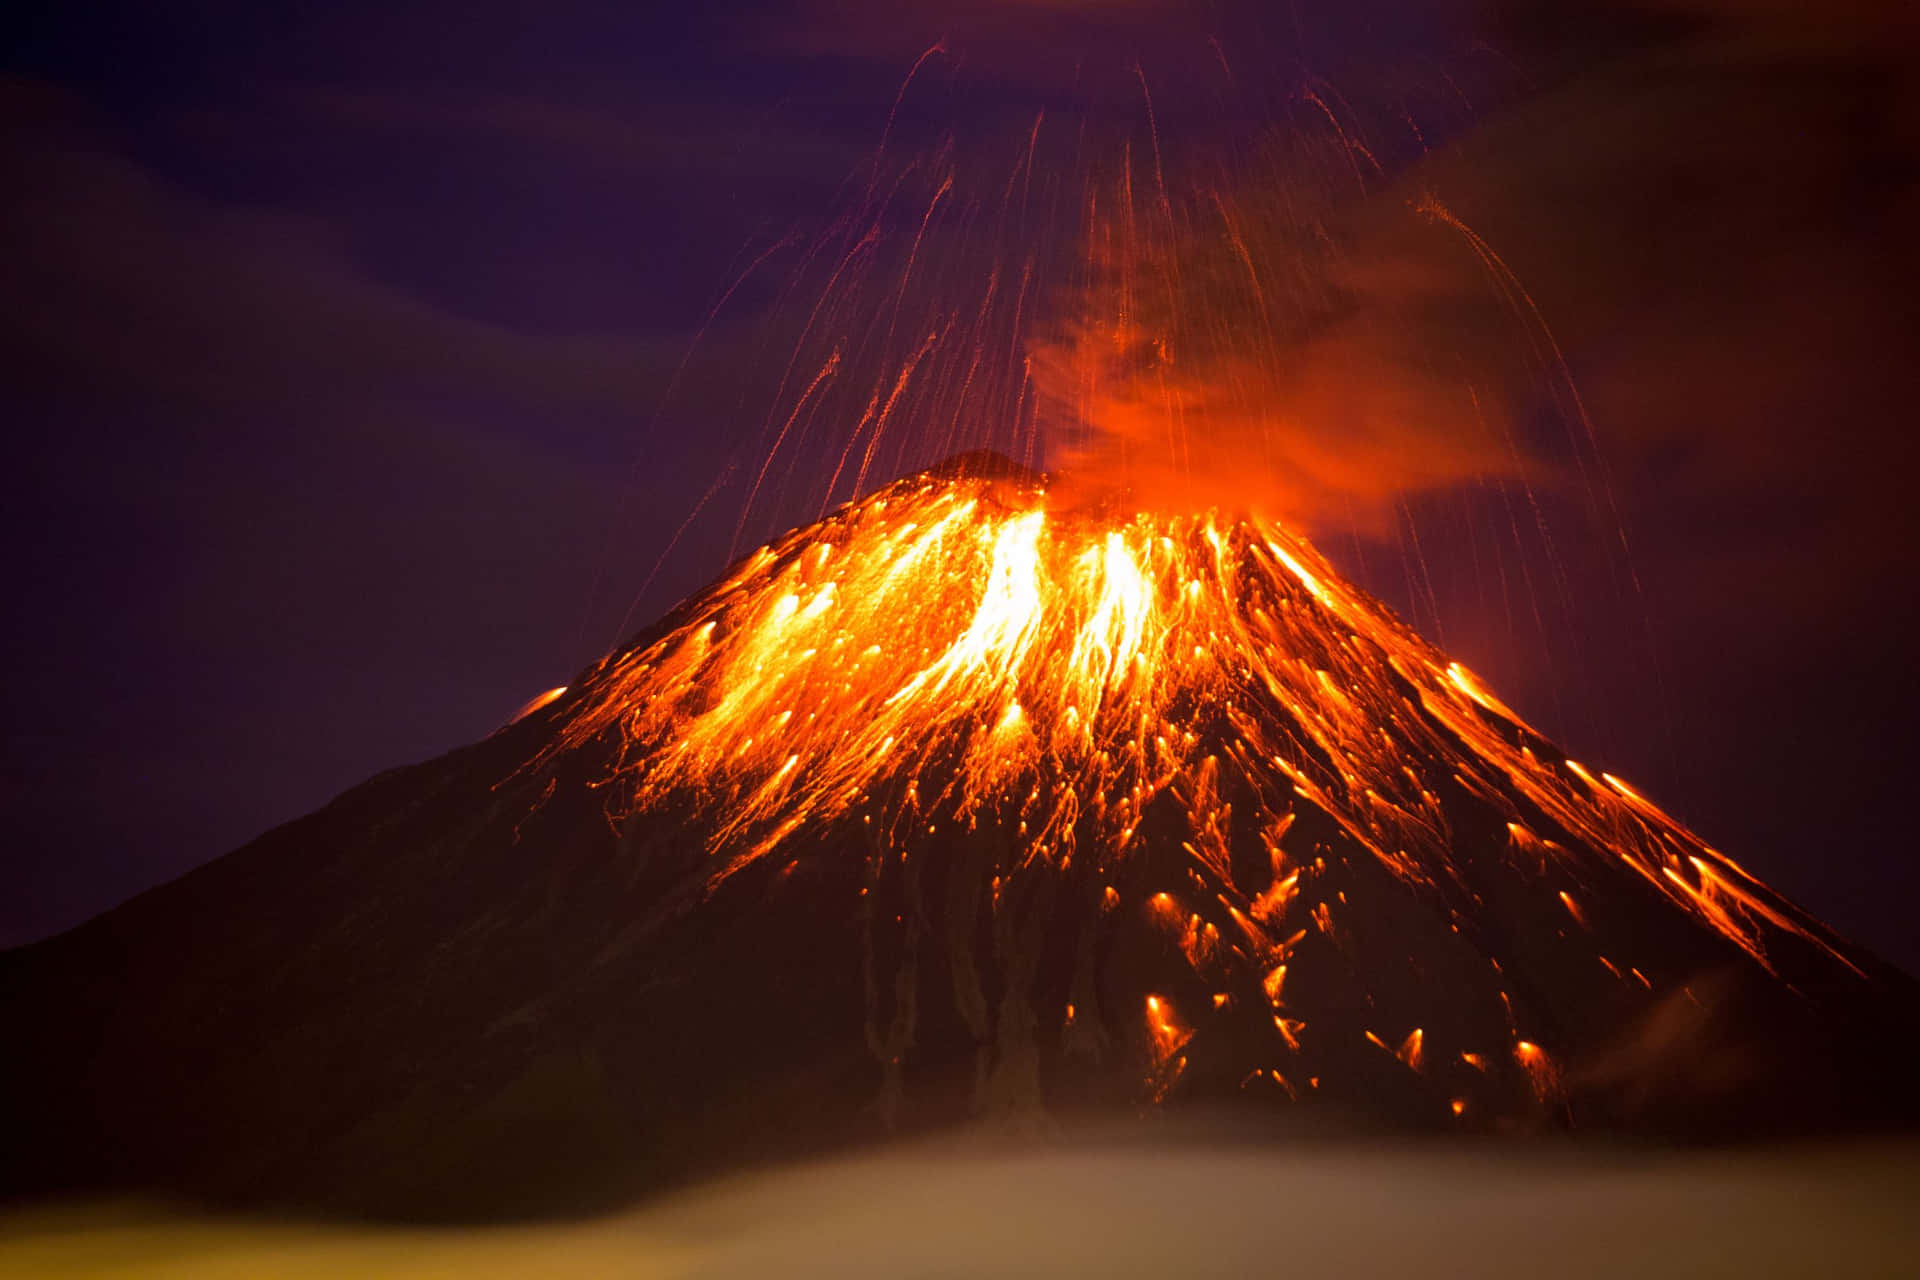 The majestic beauty of an erupting volcano.